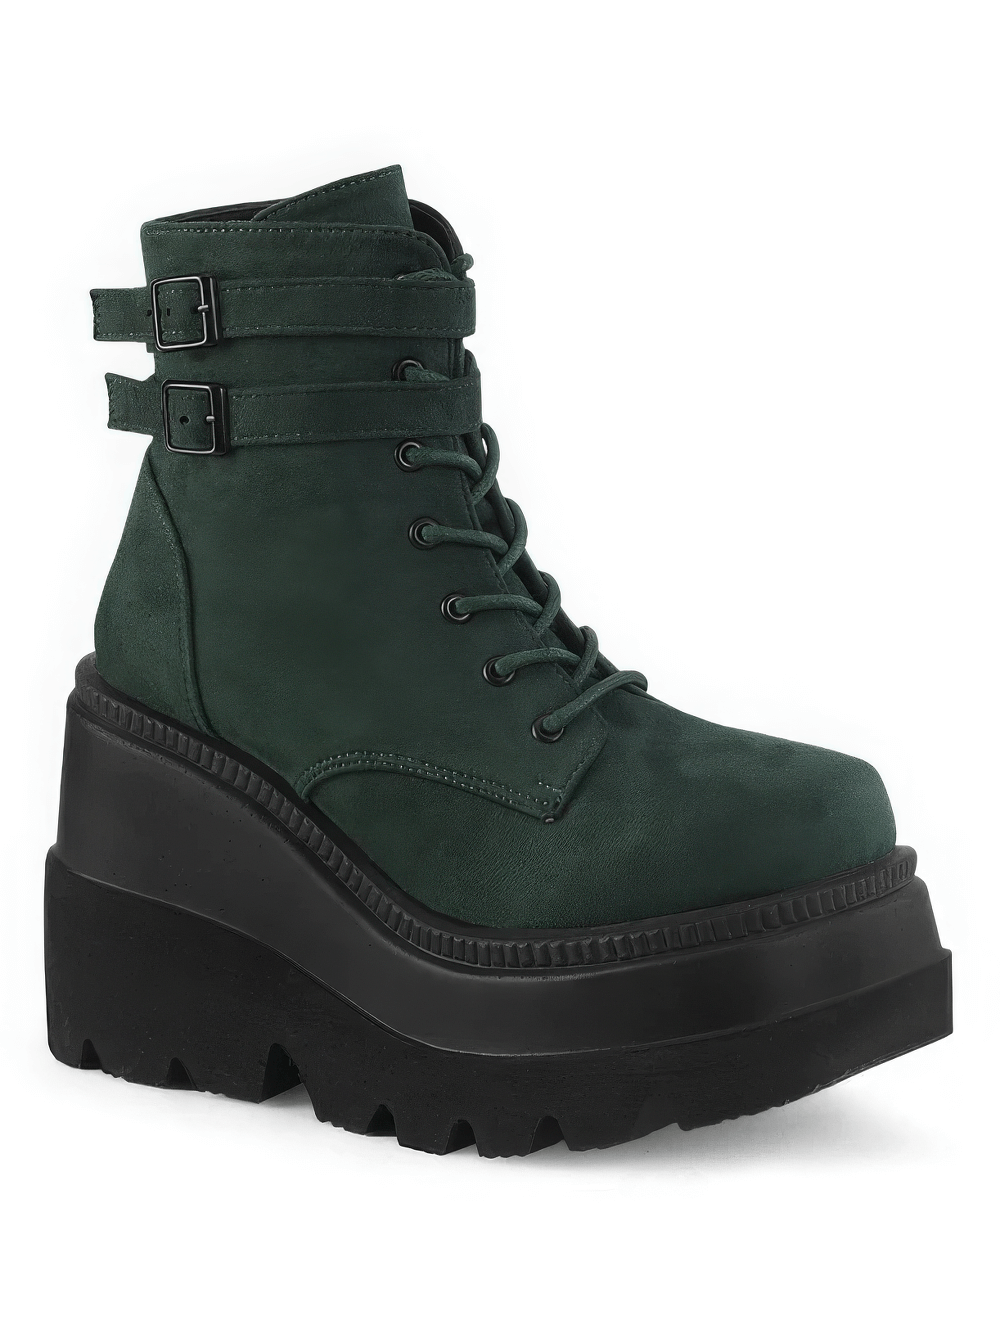 DEMONIA Lace-Up Platform Ankle Boots with Buckles